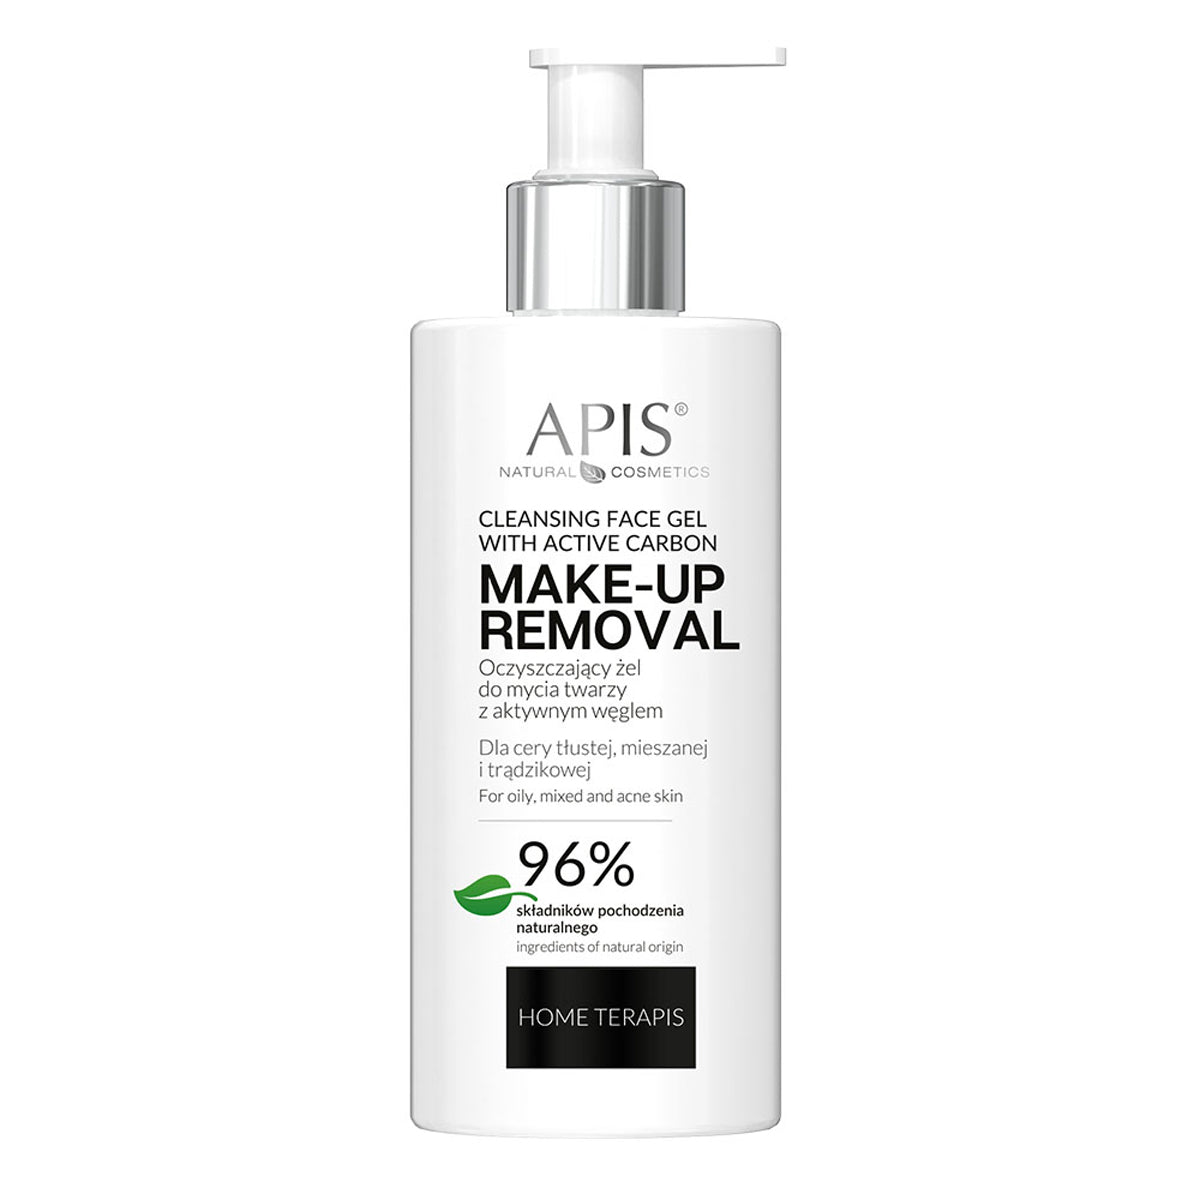 Apis cleansing face wash gel with active charcoal 300ml